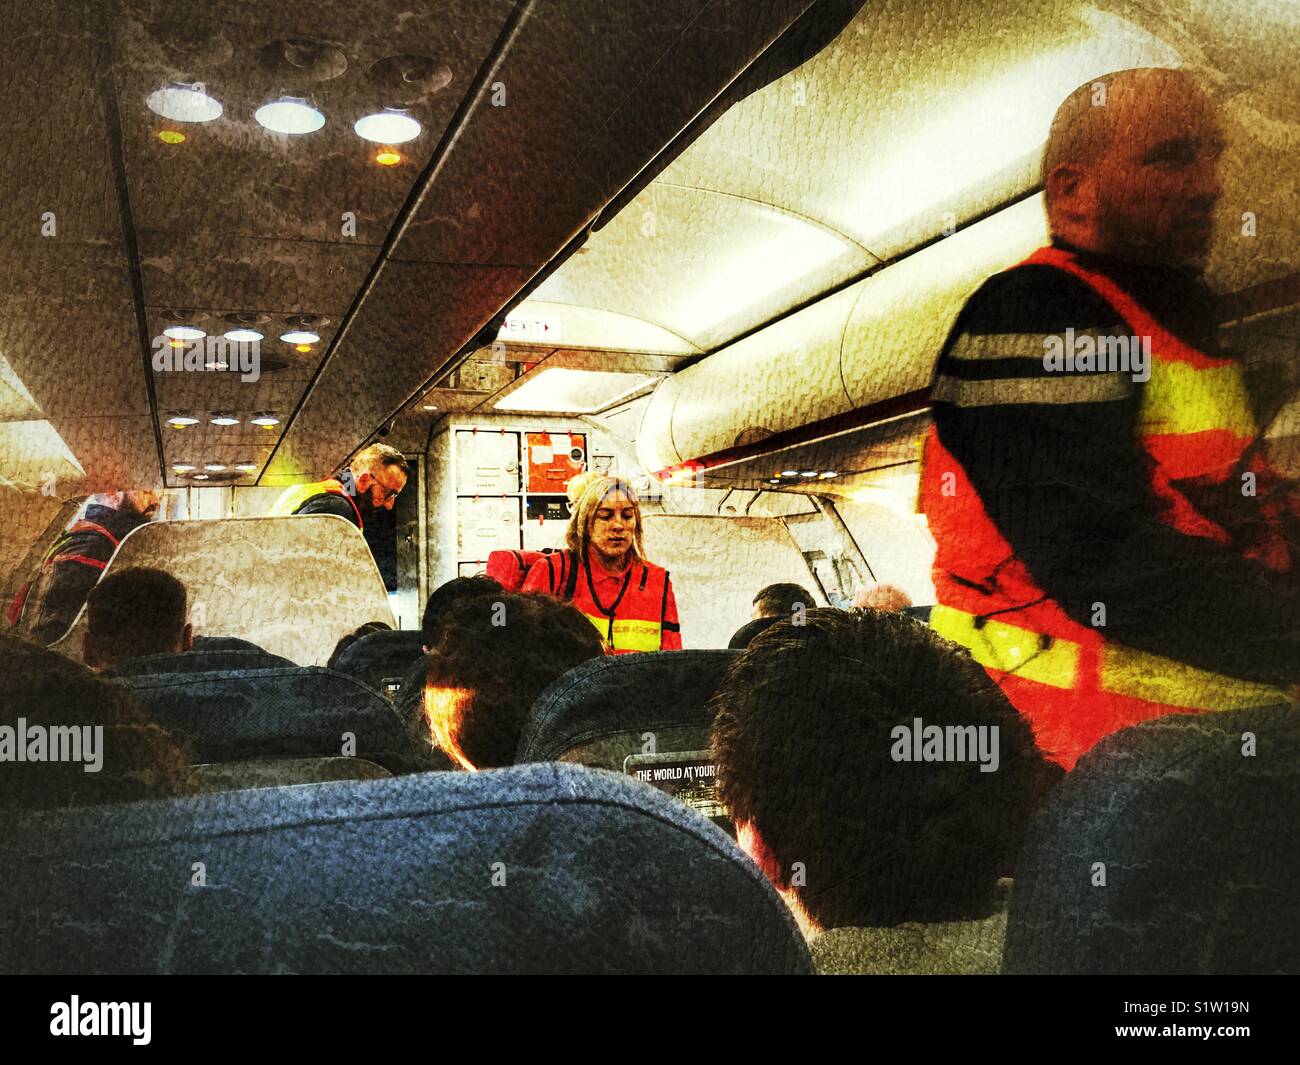 Emergency services. Medics boarding a plane which has made an emergency landing in Nantes, France, to attend a passenger who needs to be hospitalised. Stock Photo